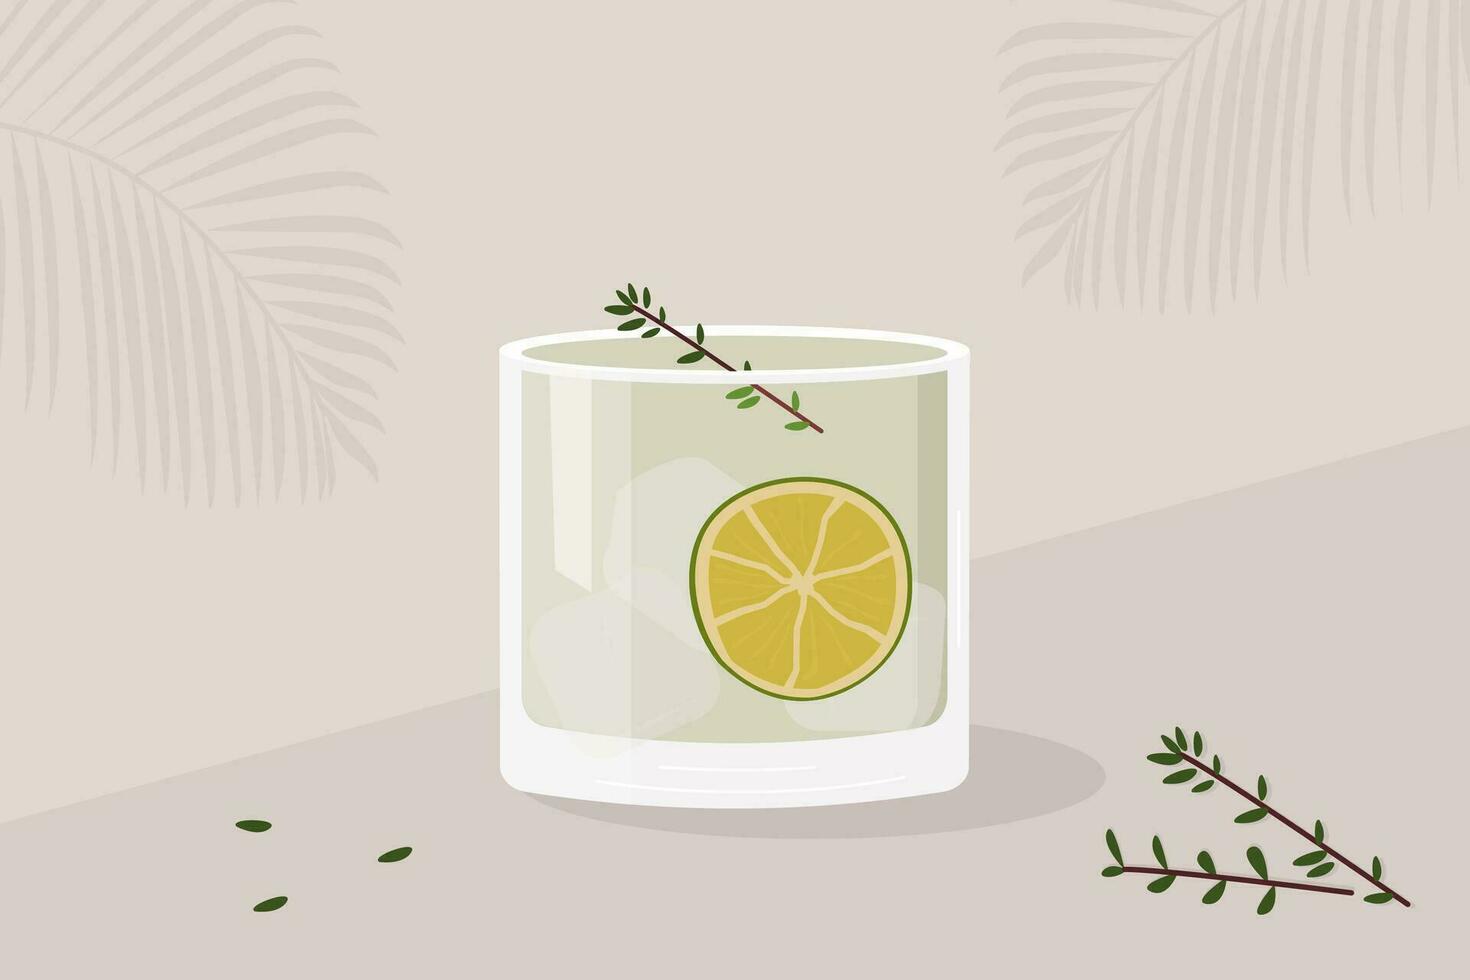 Gin Tonic Cocktail garnished with slice of lime and rosemary twigs. Summer aperitif trendy poster. Minimalist print with alcoholic beverage on background with palm shadow. Vector flat illustration.